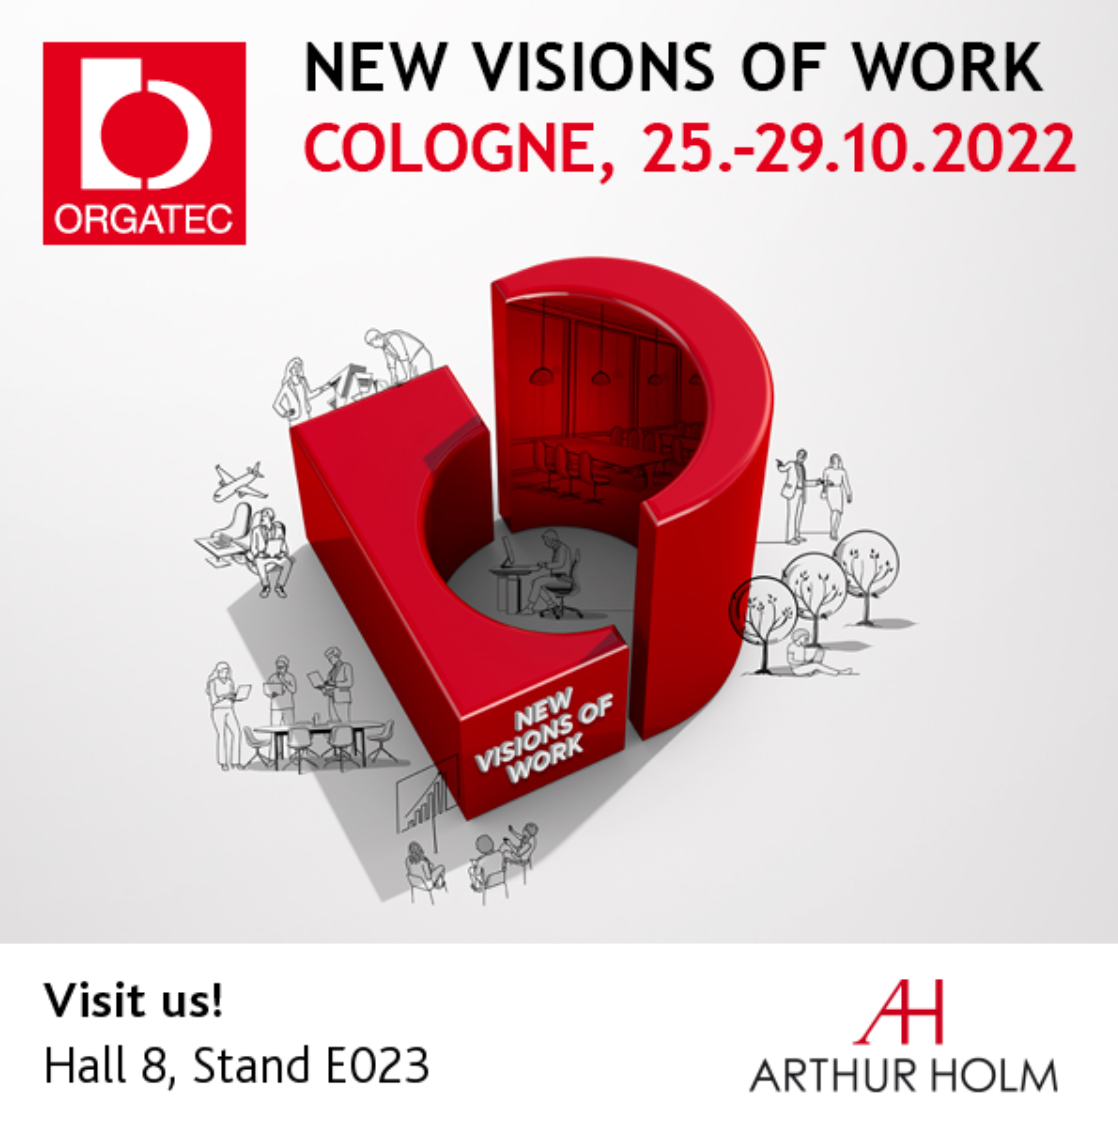 ORGATEC: We’ll be there!